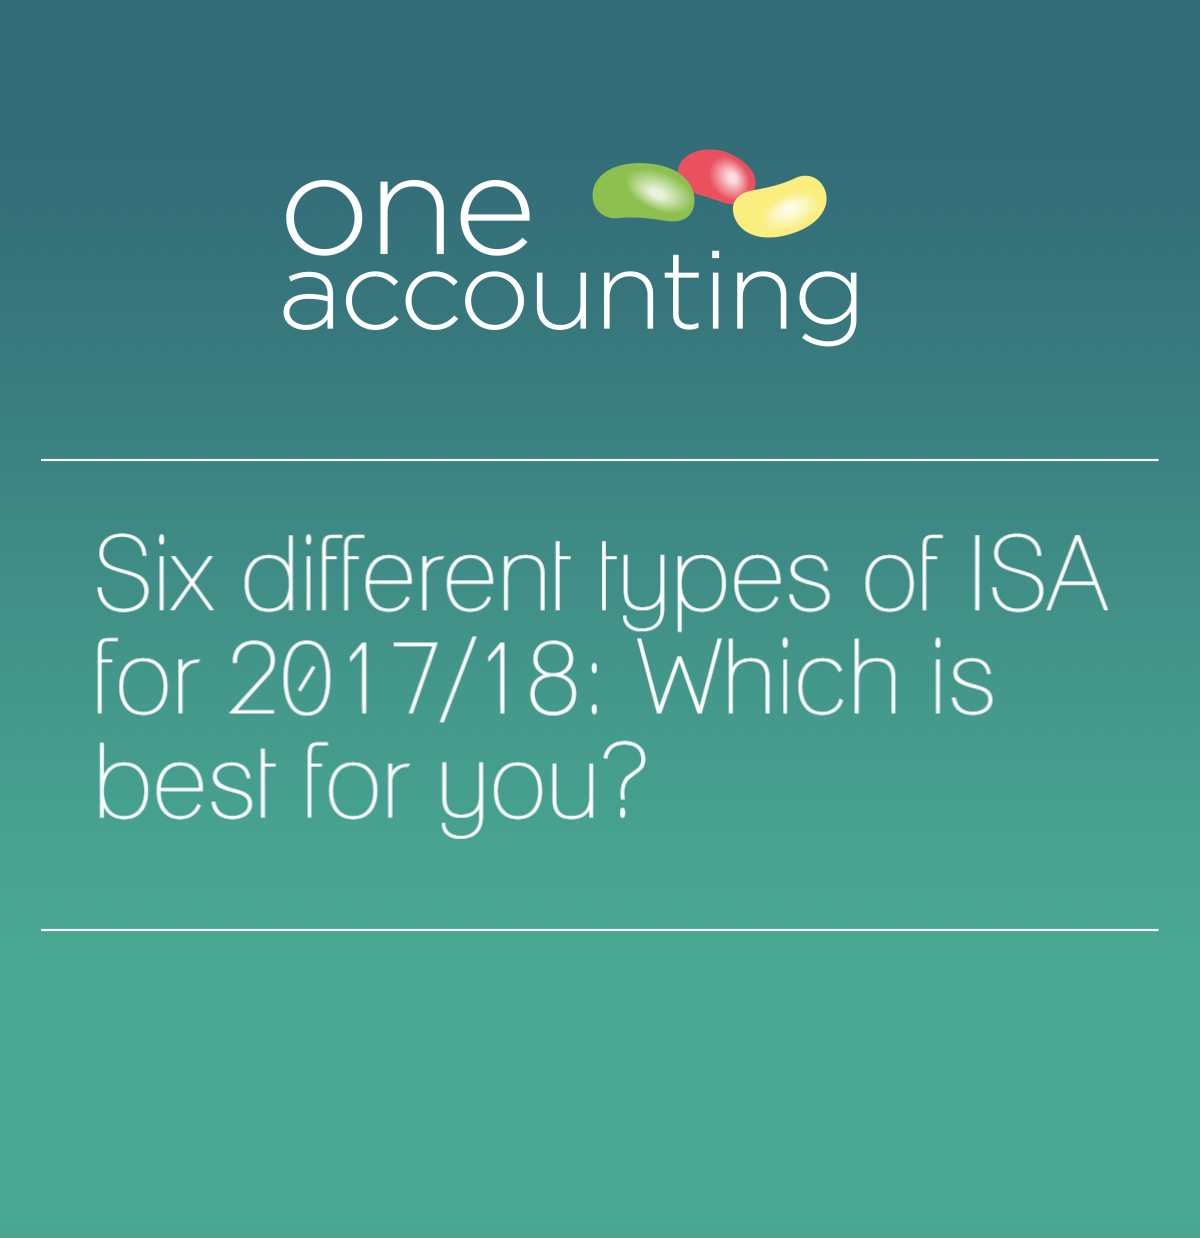 Six different types of ISA for 2017/18: Which is best for you?